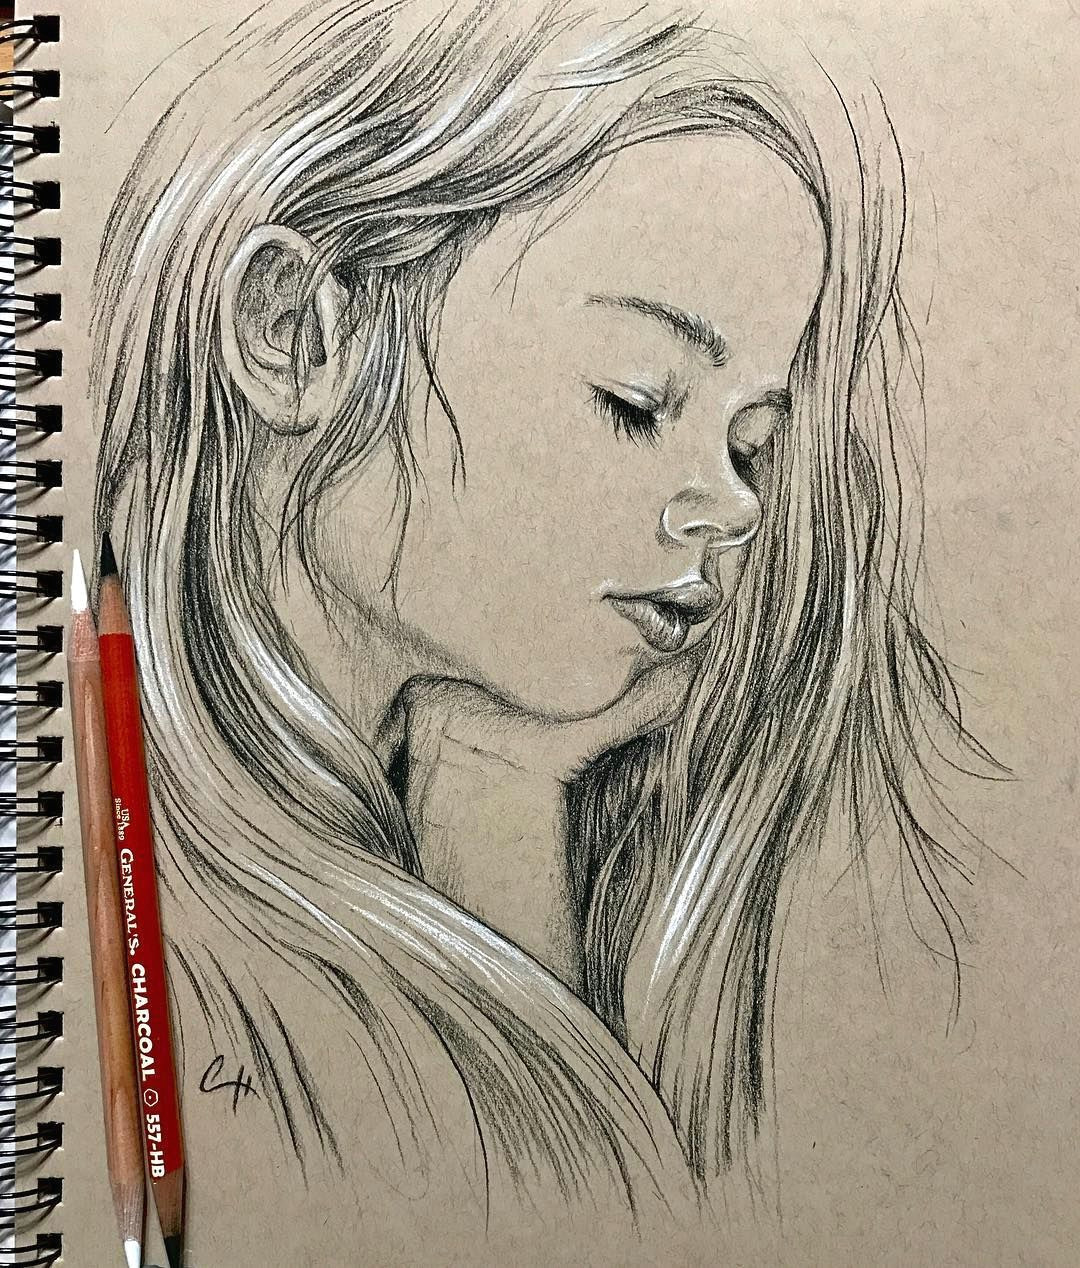 from the slowtime live session this evening girl sleeping drawing charcoalpencil thank you ron and dauvy for the awesome ref